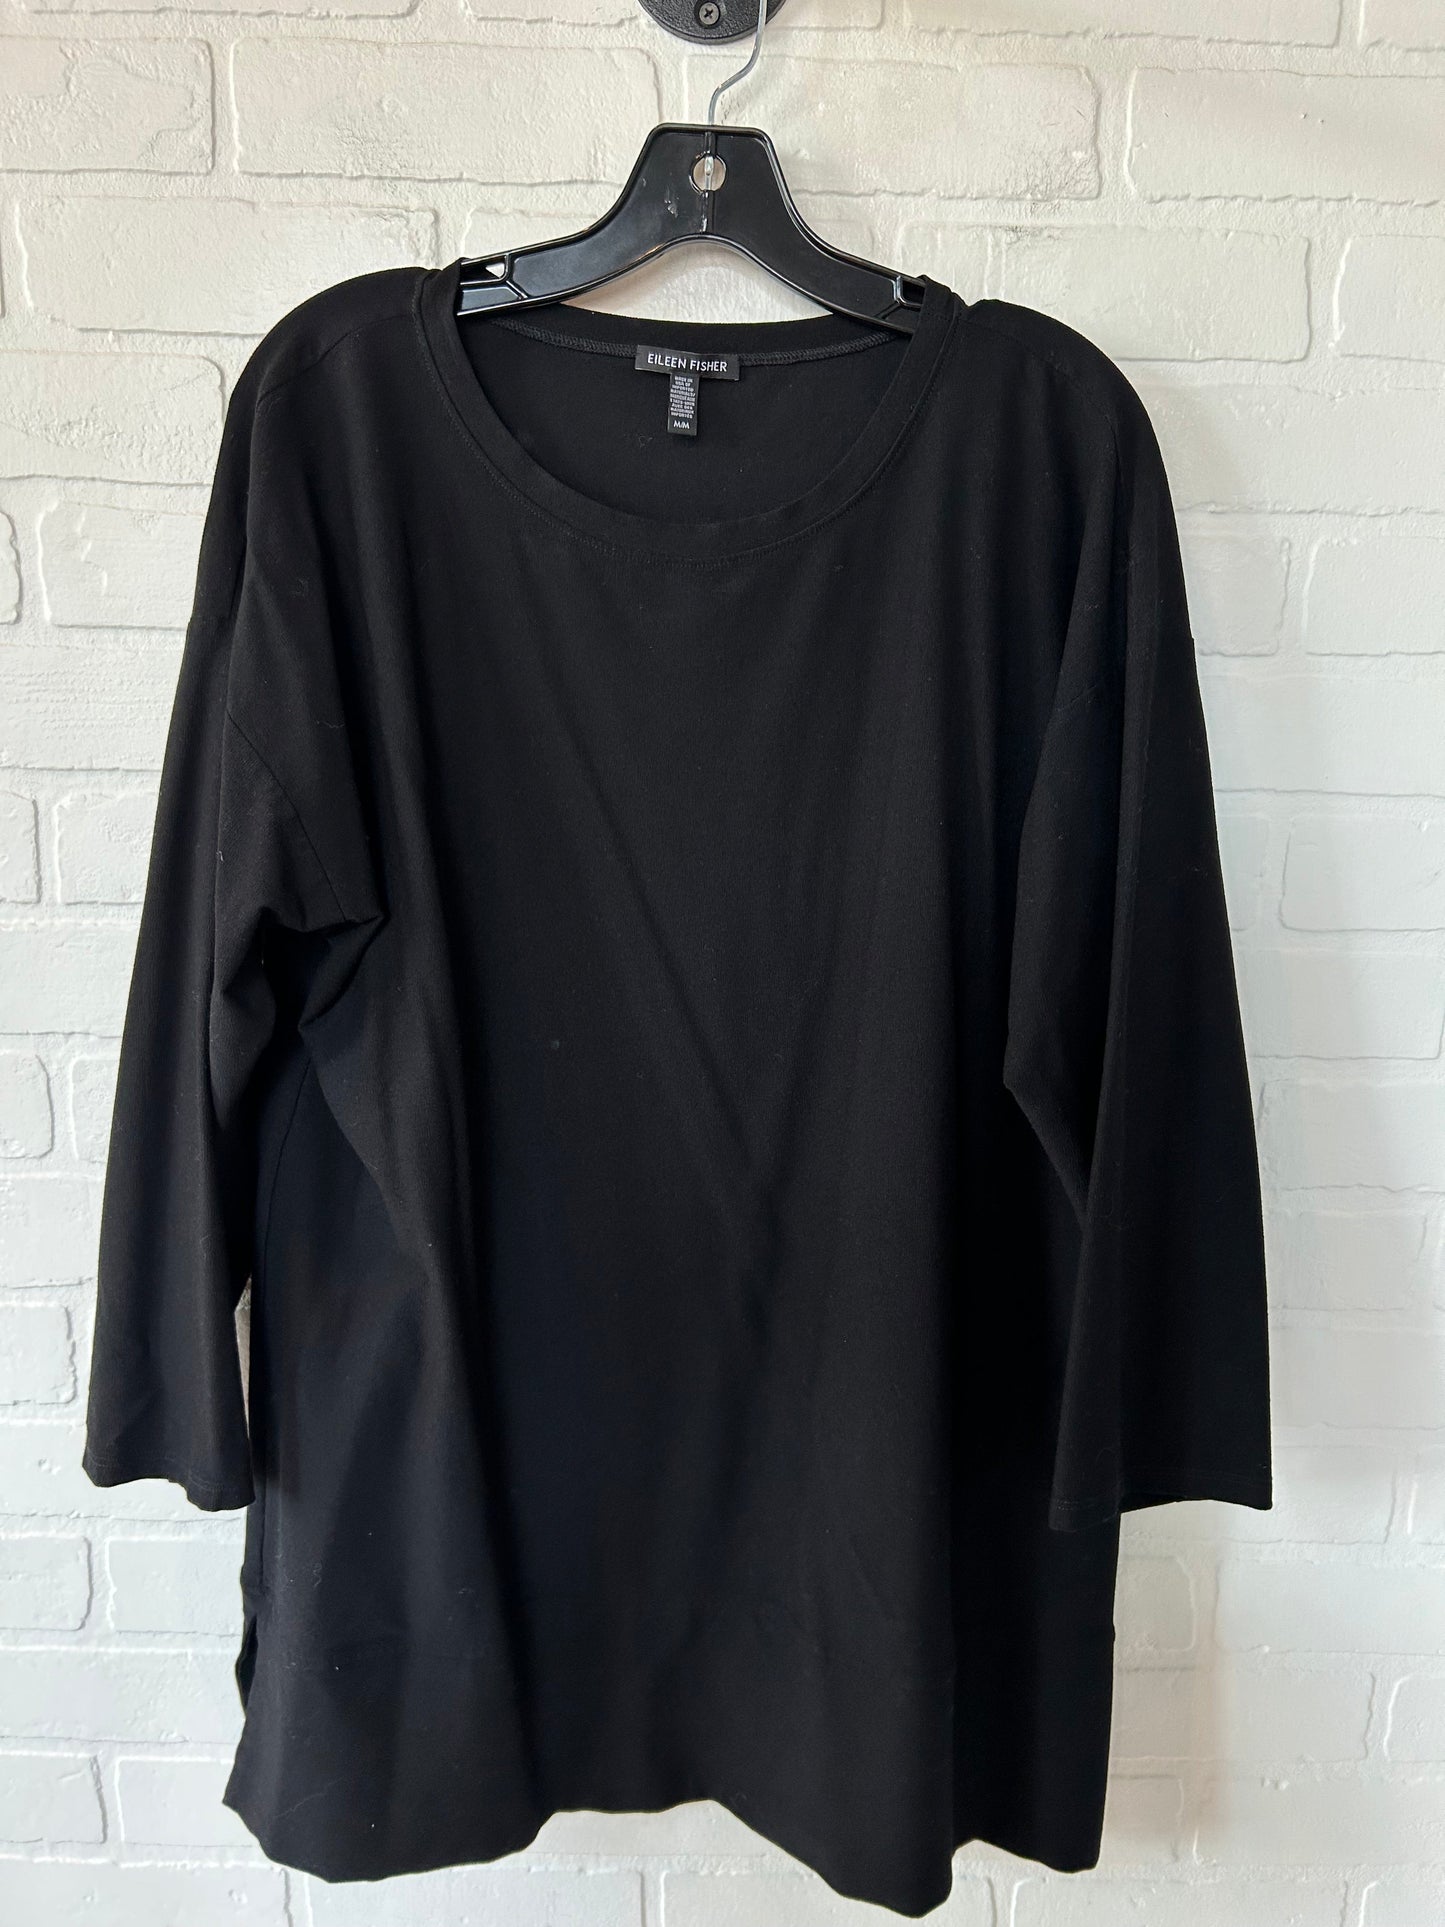 Black Top Long Sleeve Eileen Fisher, Size M